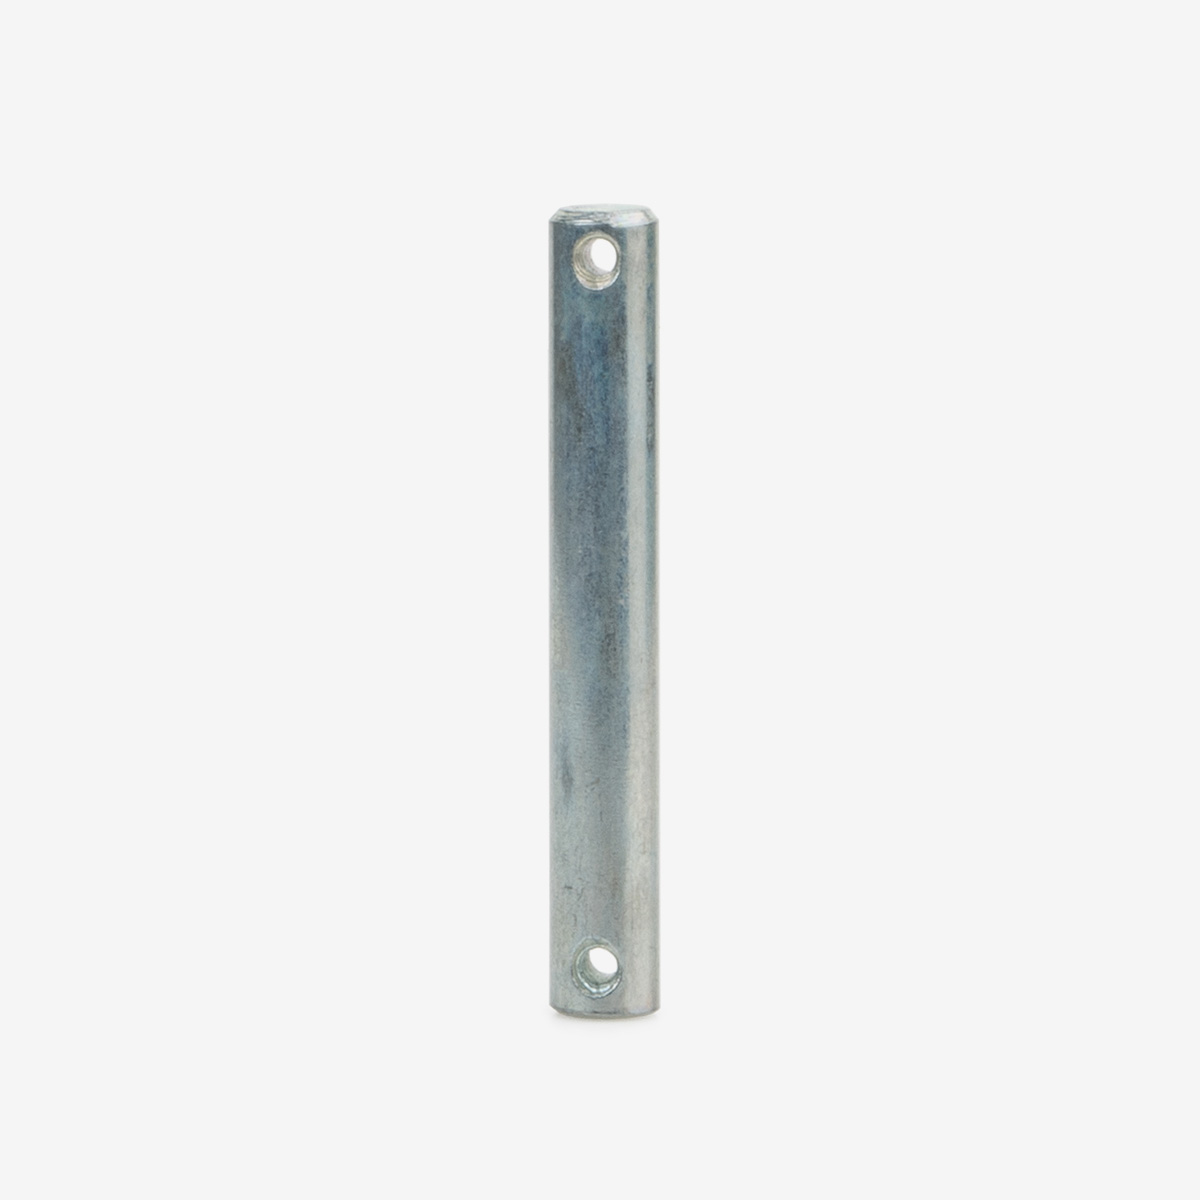 Silver headless clevis pin on white background